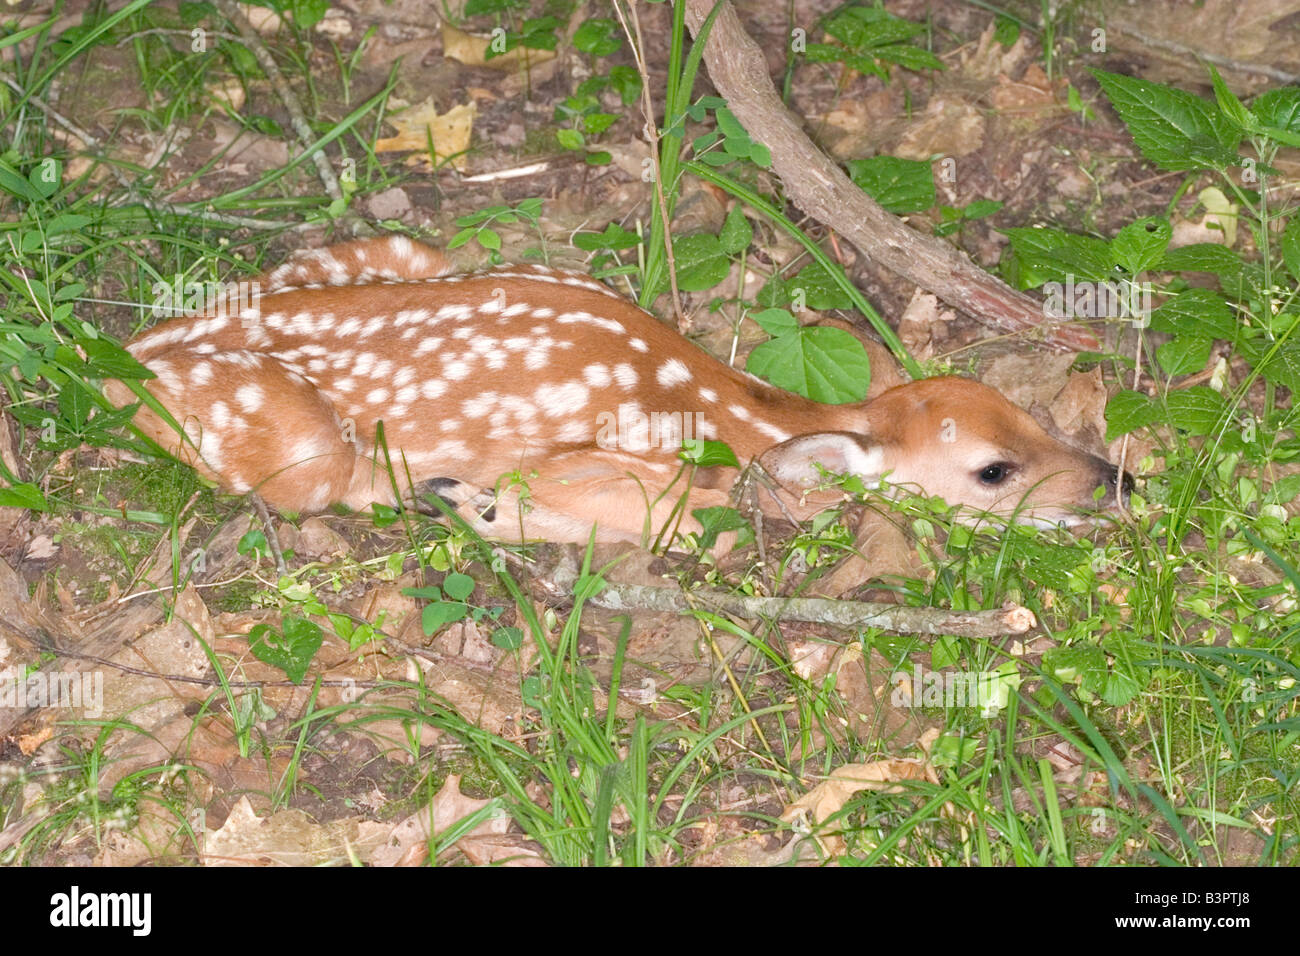 White-tailed deer fawn Banque D'Images